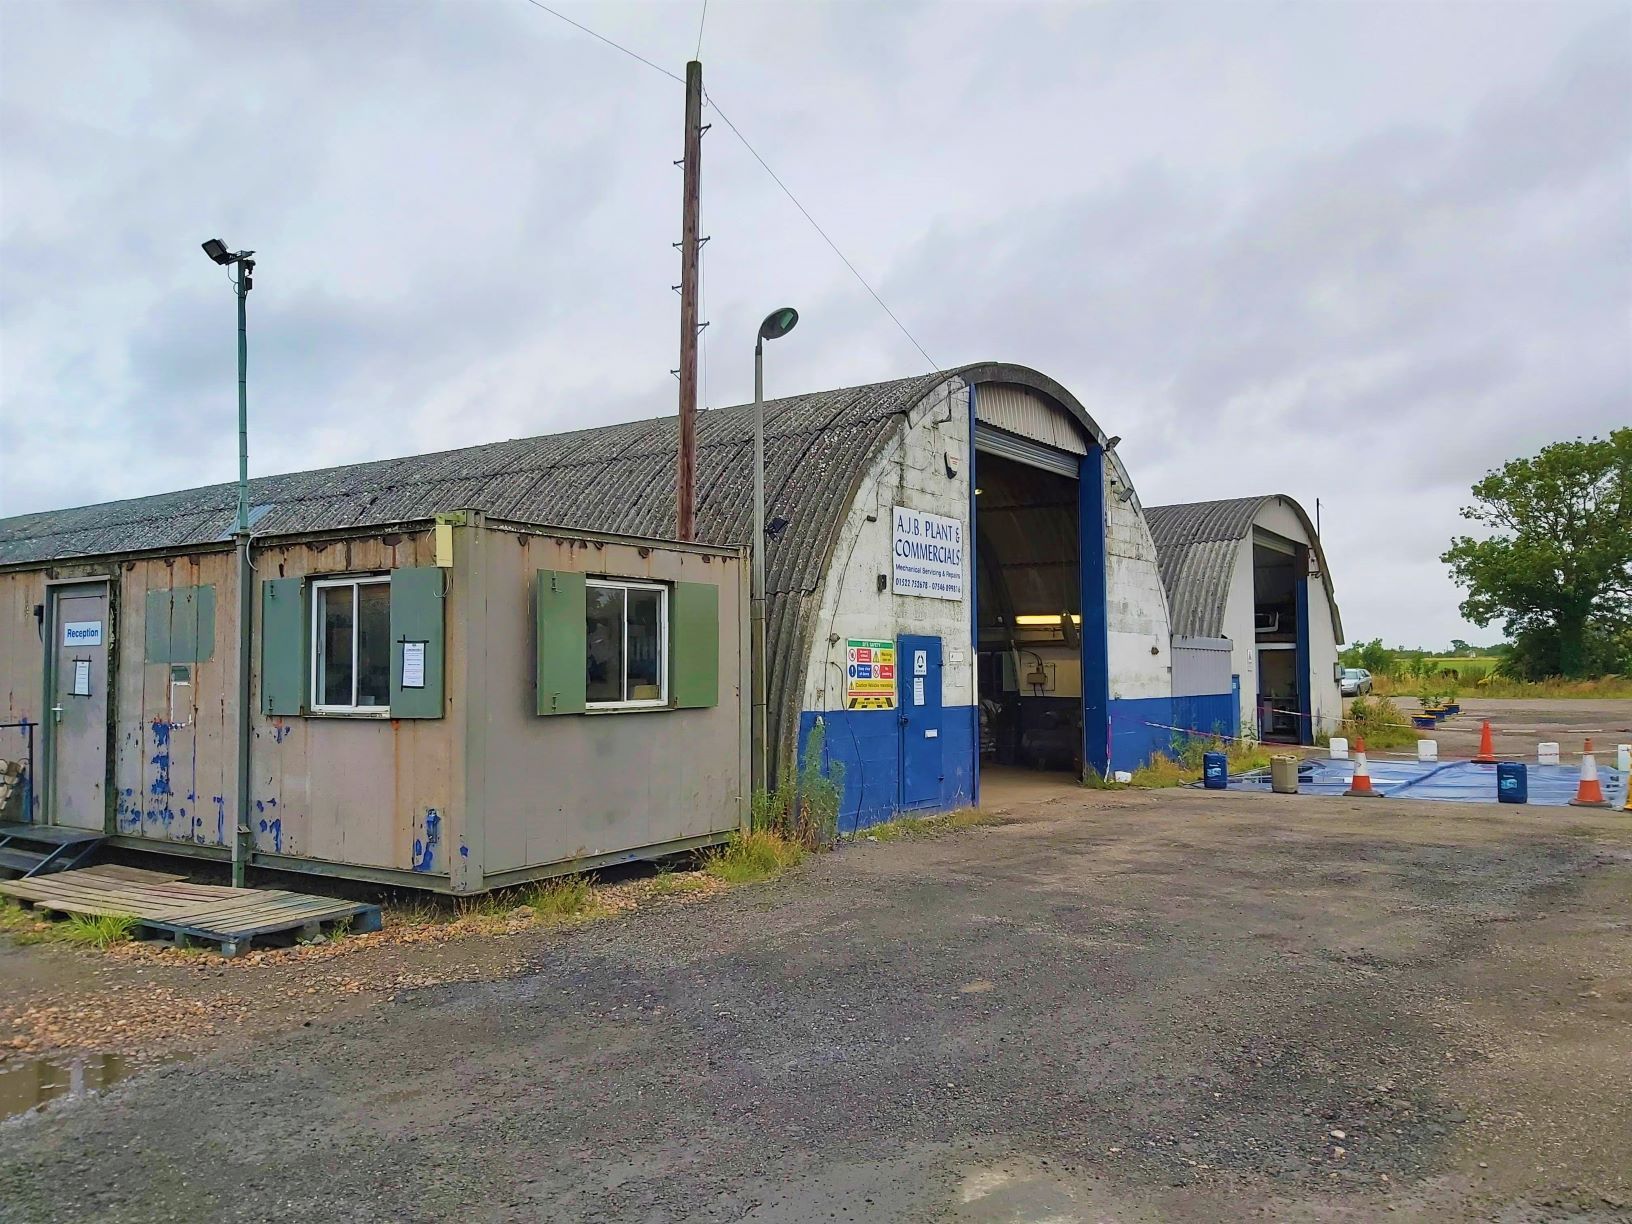 Existing Nissen Huts to be replaced - planning application approved for redevelopment of Fosters Yard in Langworth near Lincoln